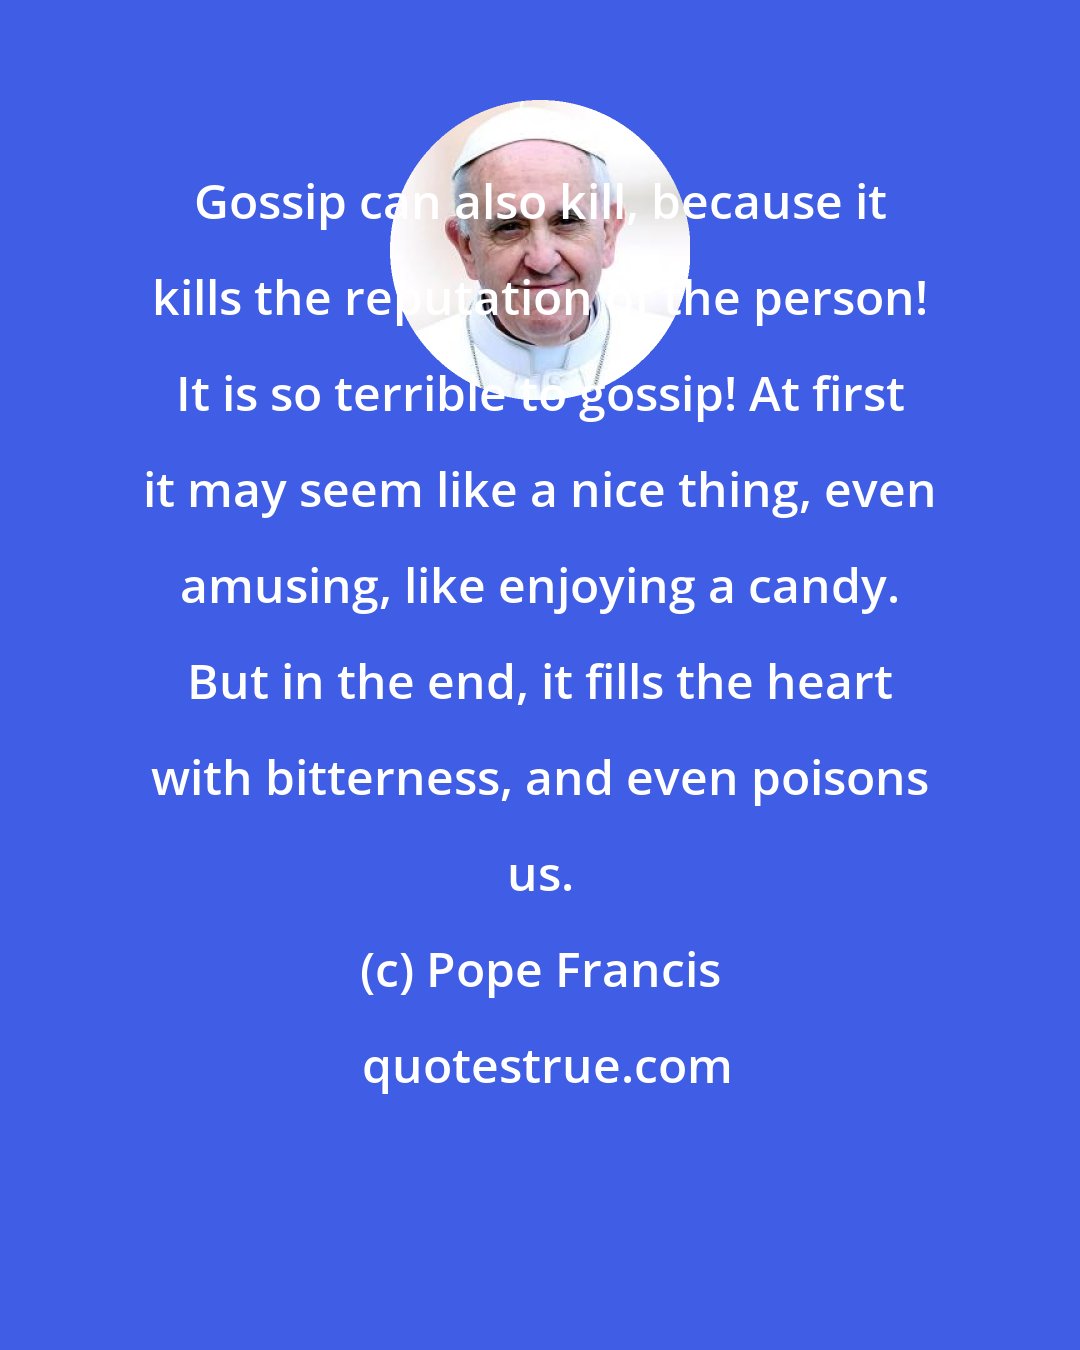 Pope Francis: Gossip can also kill, because it kills the reputation of the person! It is so terrible to gossip! At first it may seem like a nice thing, even amusing, like enjoying a candy. But in the end, it fills the heart with bitterness, and even poisons us.